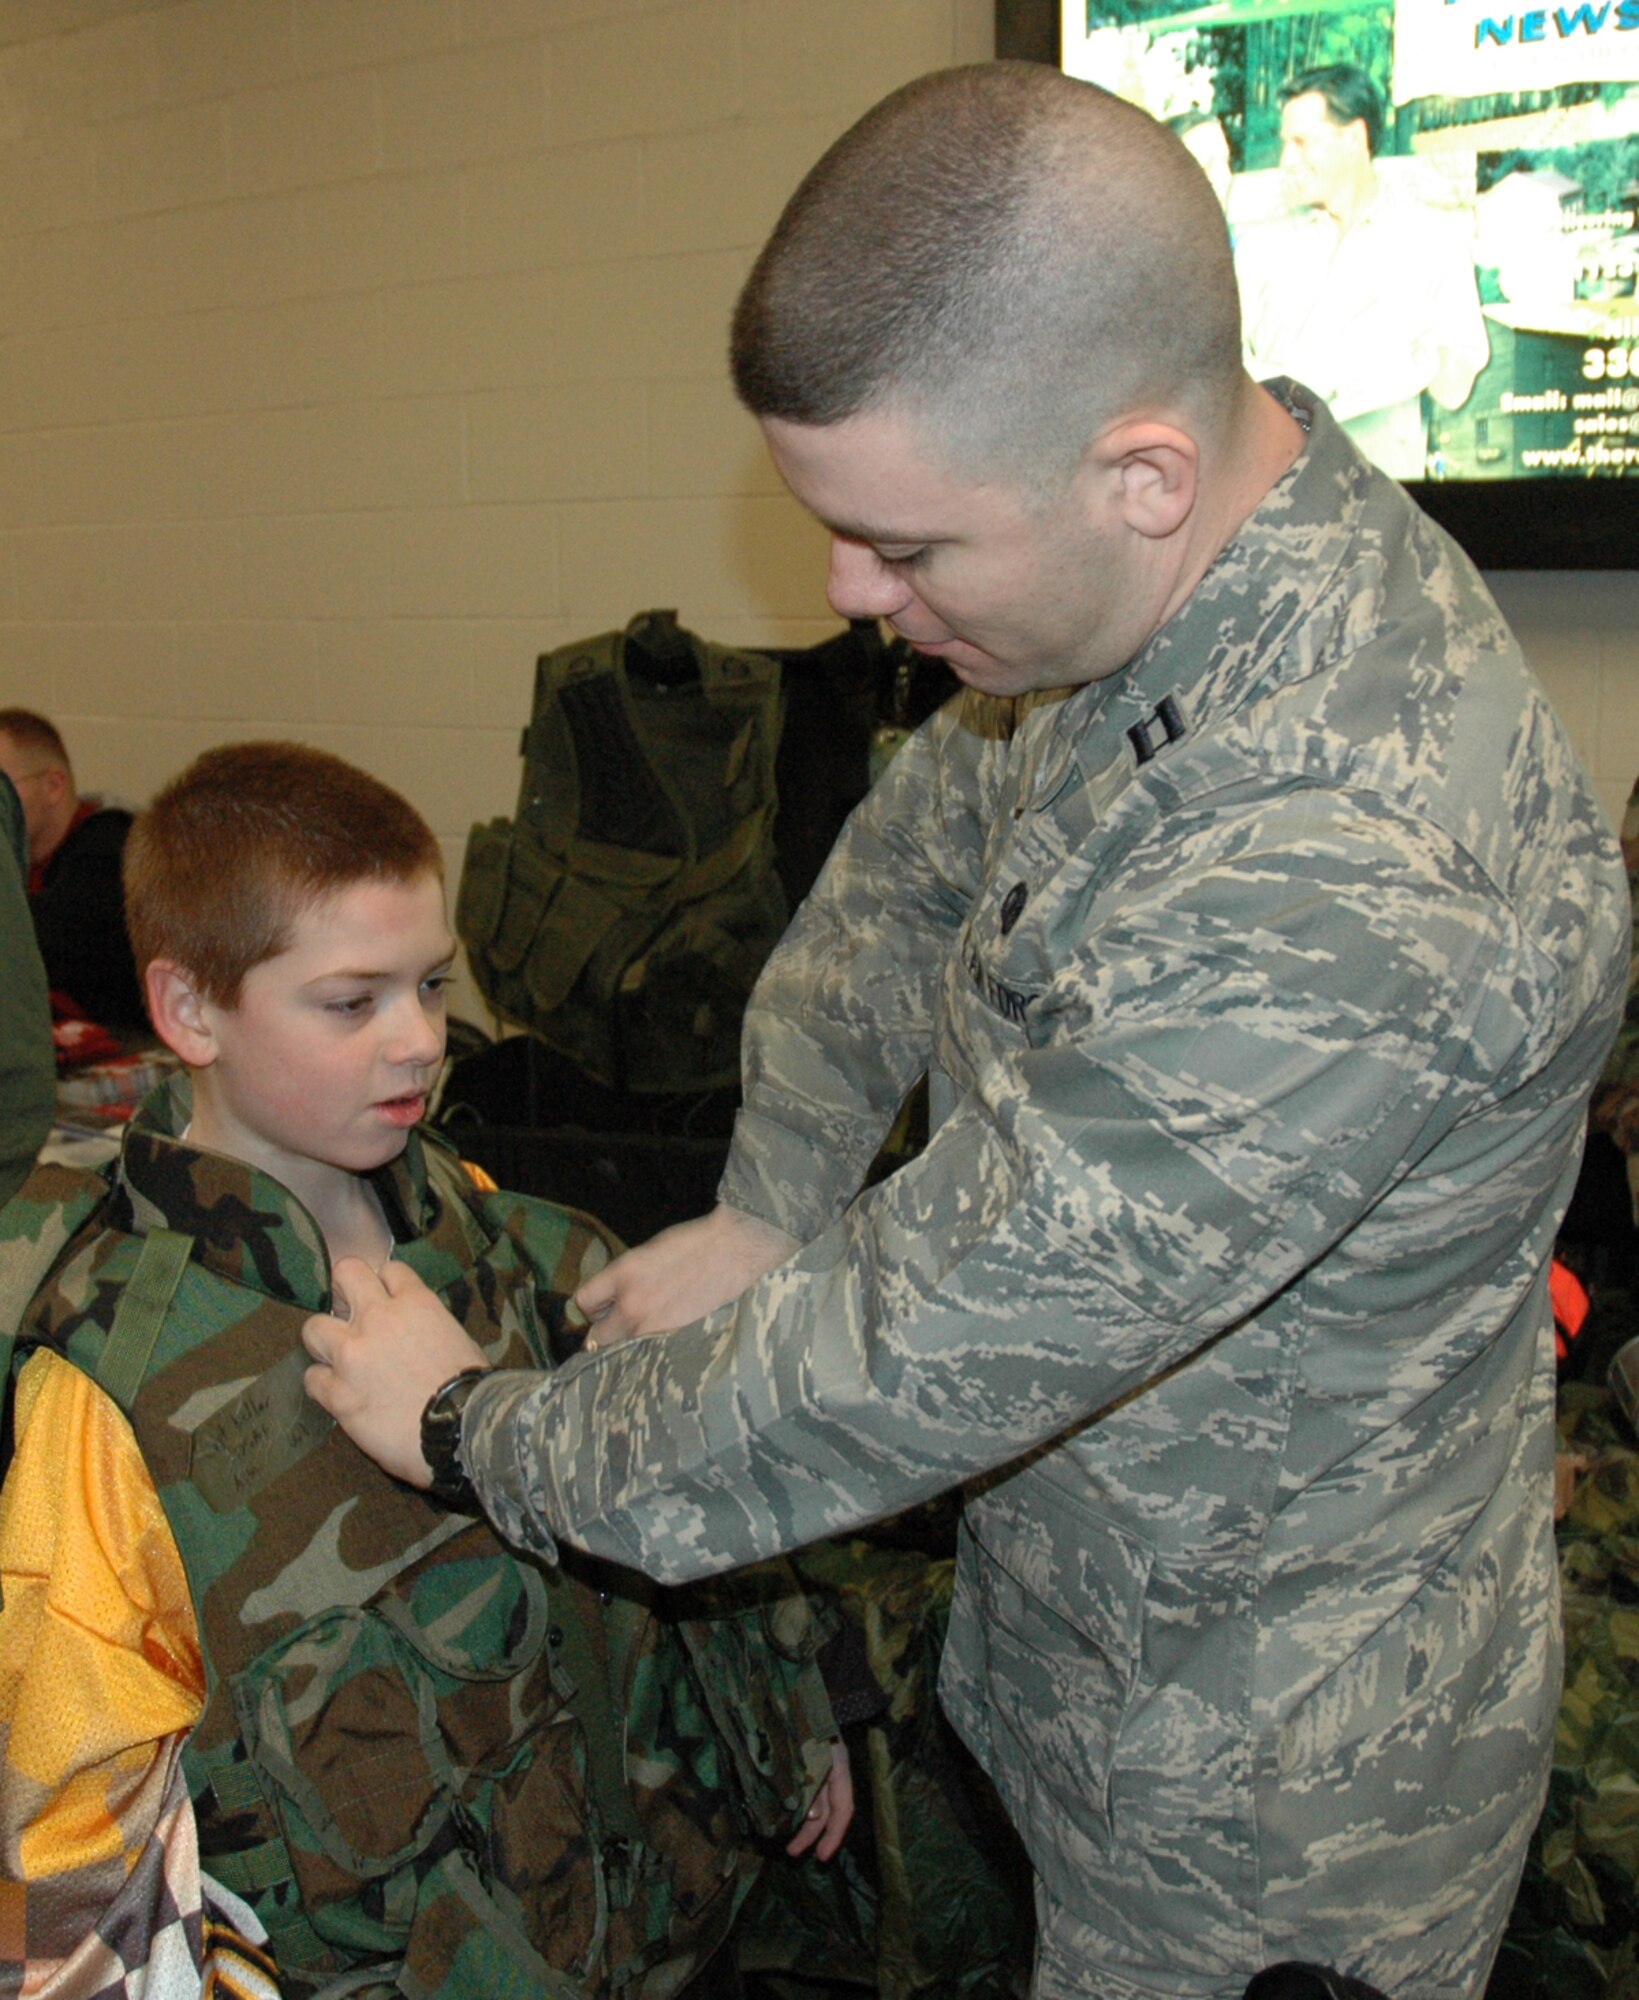 YOUNGSTOWN, Ohio – Air Force Reserve Capt. Steve Kellar, operations officer with the 910th Security Forces Squadron, helps a young boy try on a flack jacket that was part of a display at the Chevrolet Centre Jan. 19. 2008.  The event was part of Military Night at the Youngstown Steelhounds hockey game against the Shreveport Mudbugs.  U.S. Air Force photo/Tech. Sgt. Bob Barko Jr.